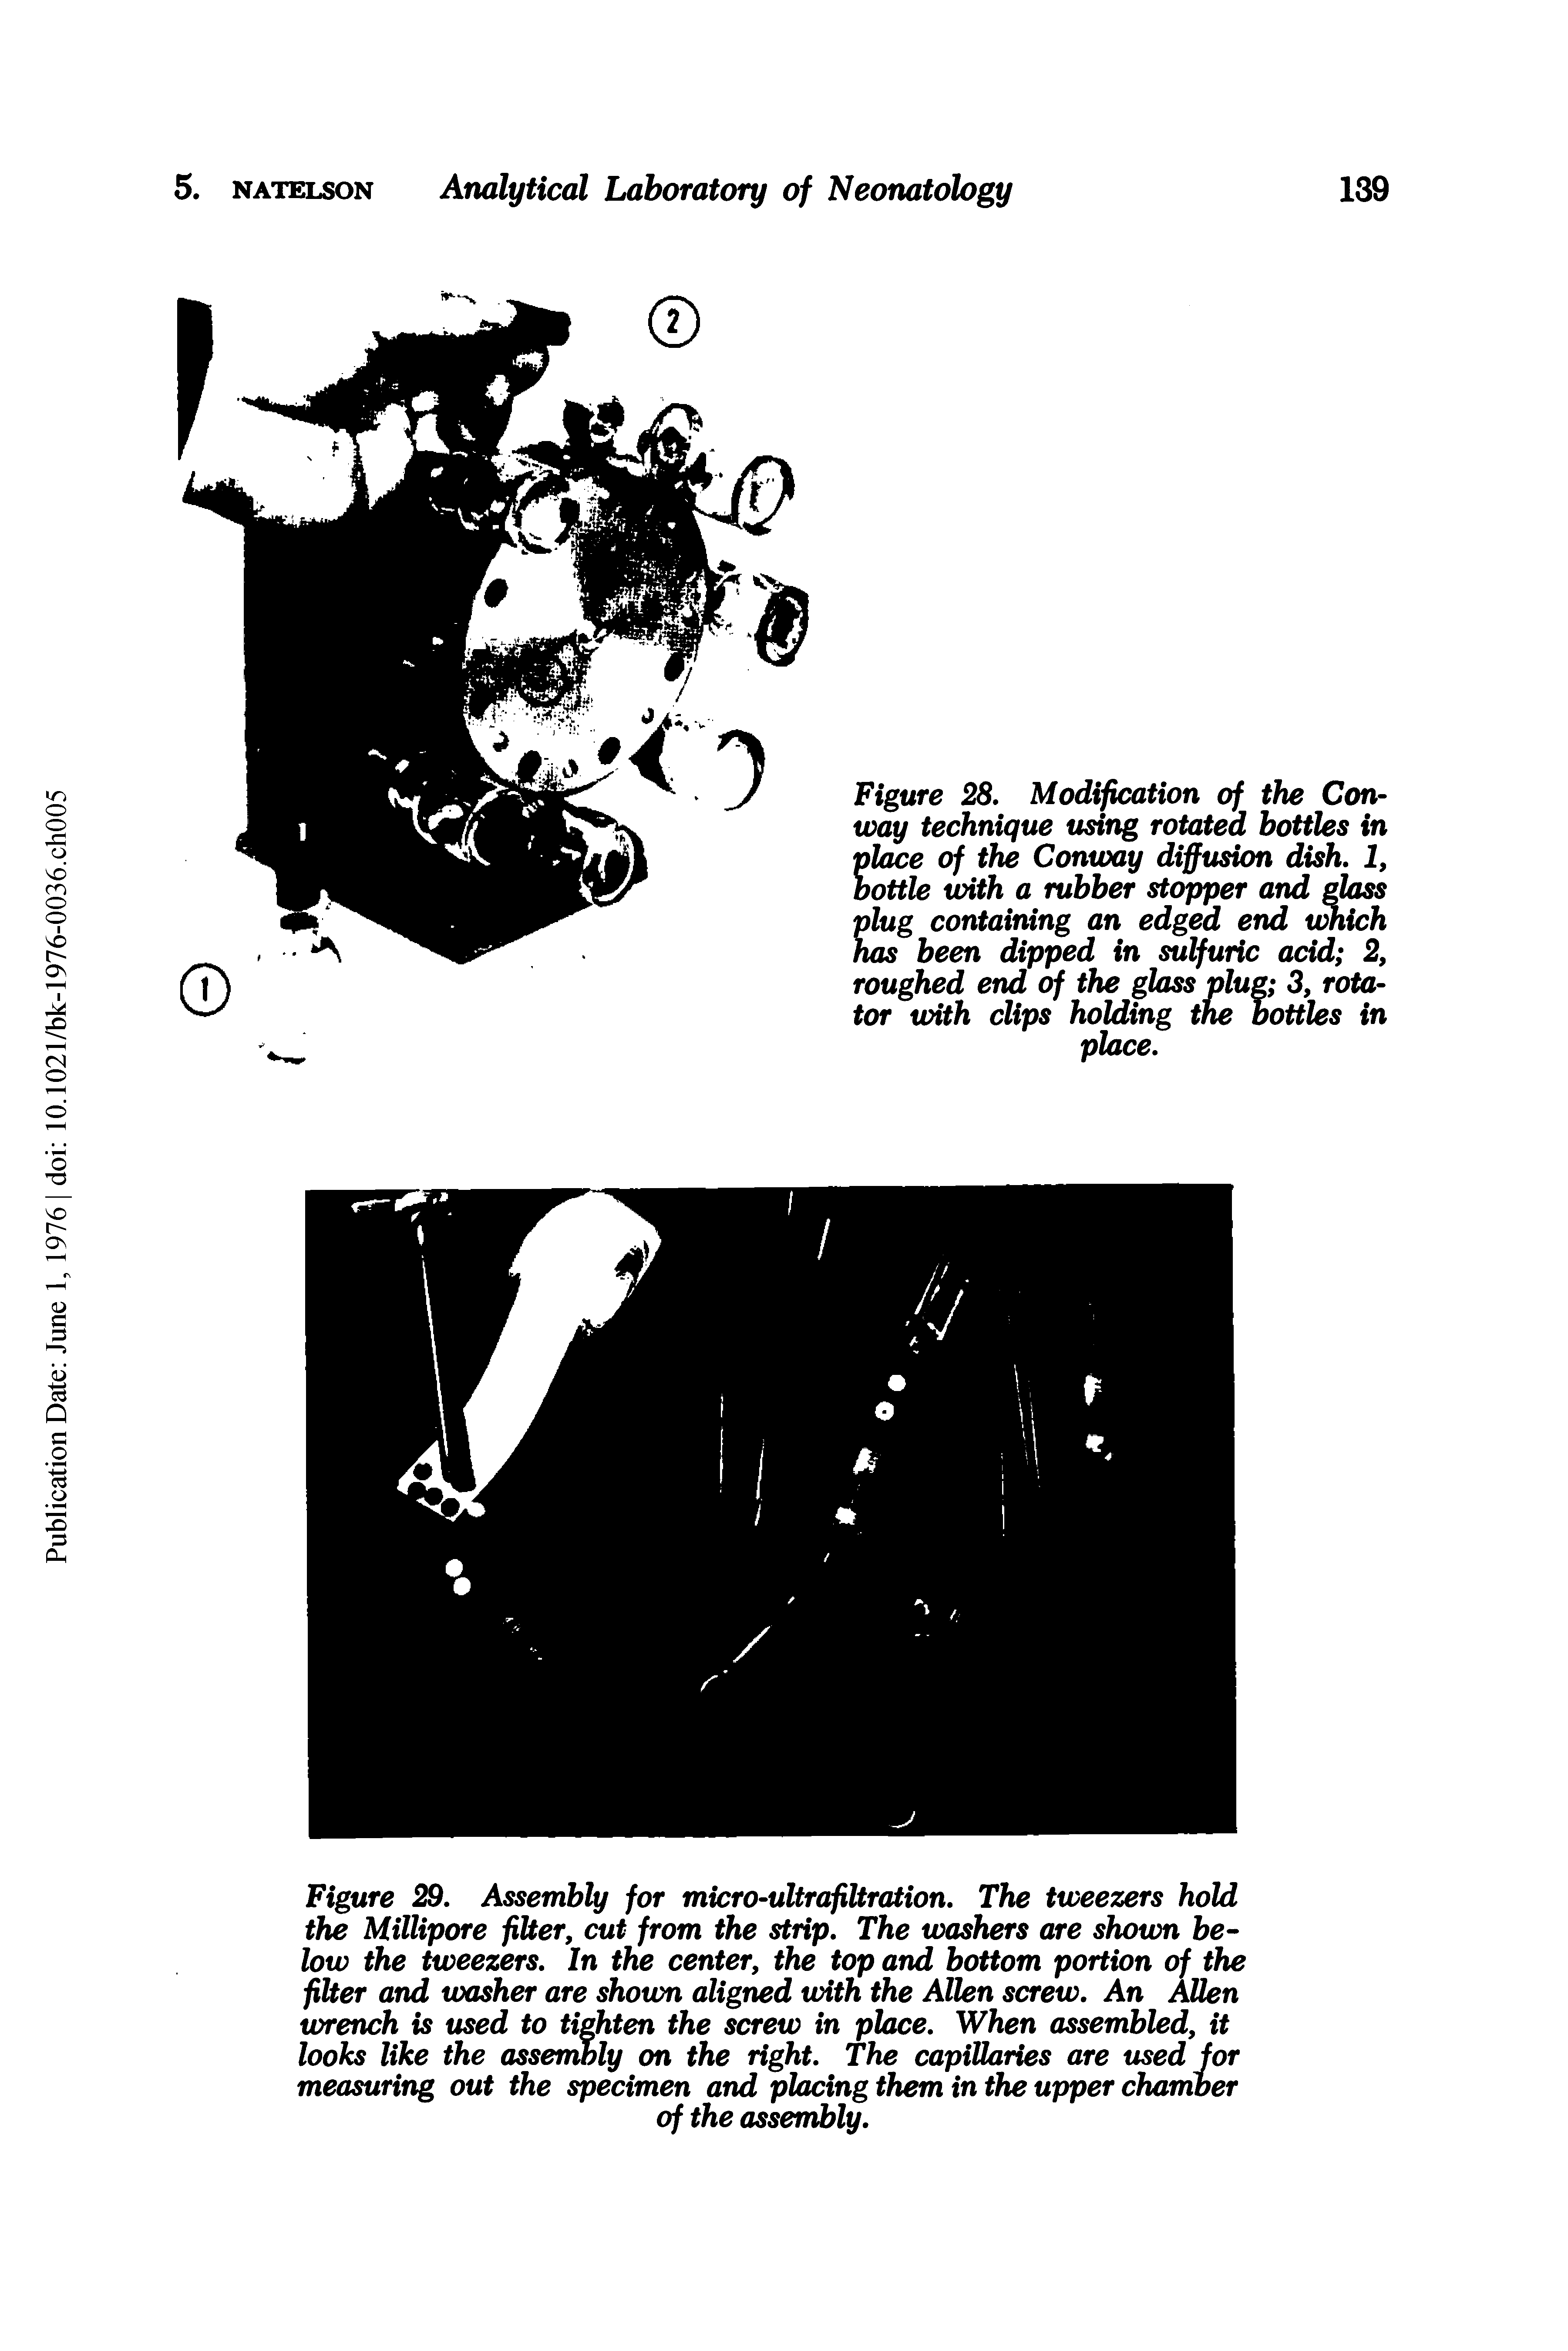 Figure 28, Modification of the Conway technique using rotated bottles in pkwe of the Conway diffusion dish, 1, bottle with a rubber stopper and glass plug containing an edged end which has been dipped in sulfuric acid 2, roughed end of the glass plug 3, rotator with clips holding the bottles in place.